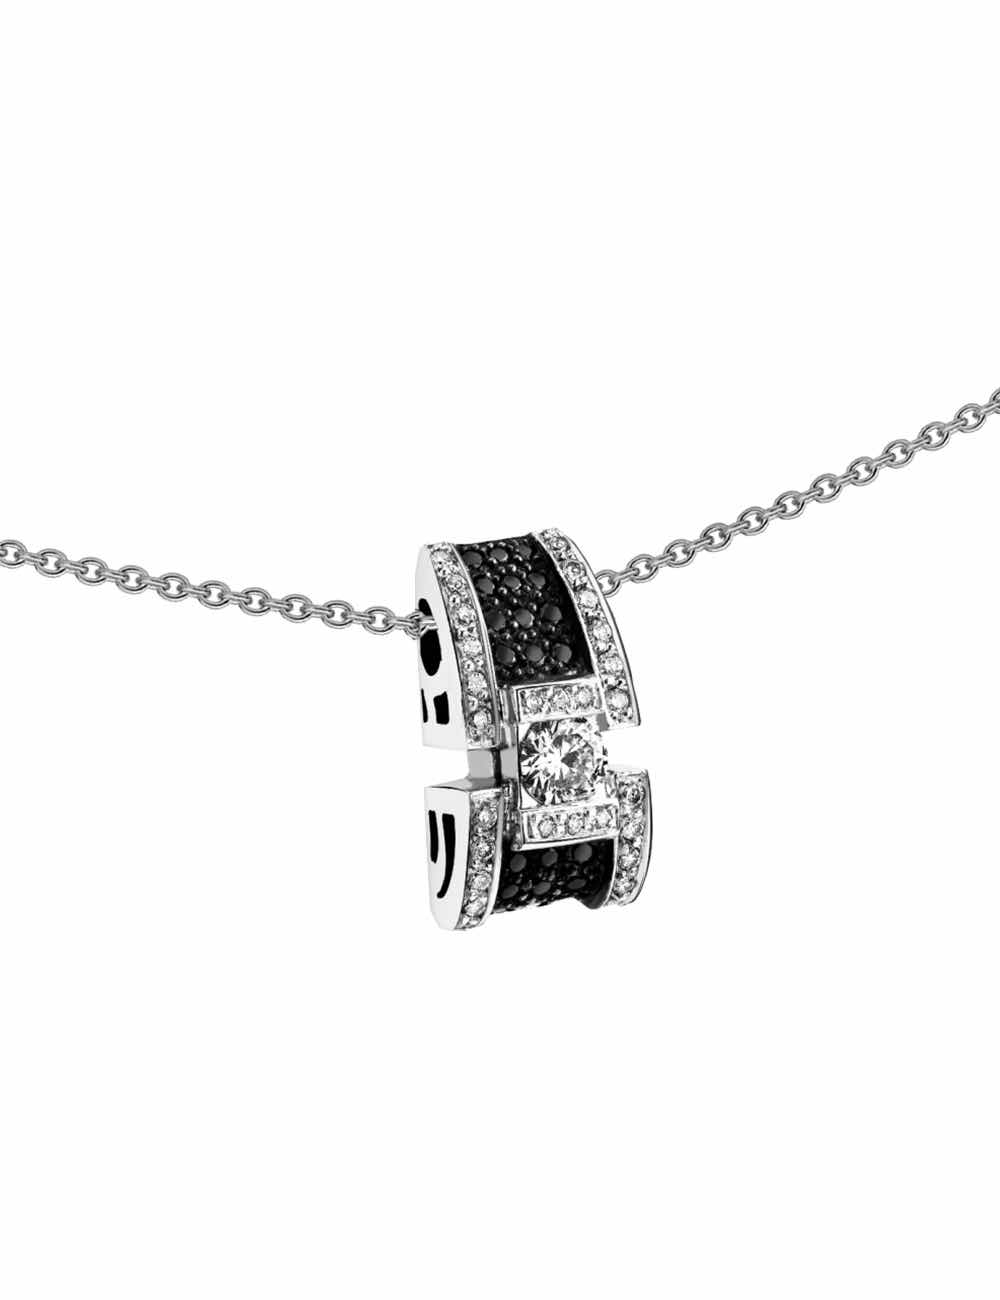 Luxury pendant for women in white gold 18k entirely set with white and black diamonds.